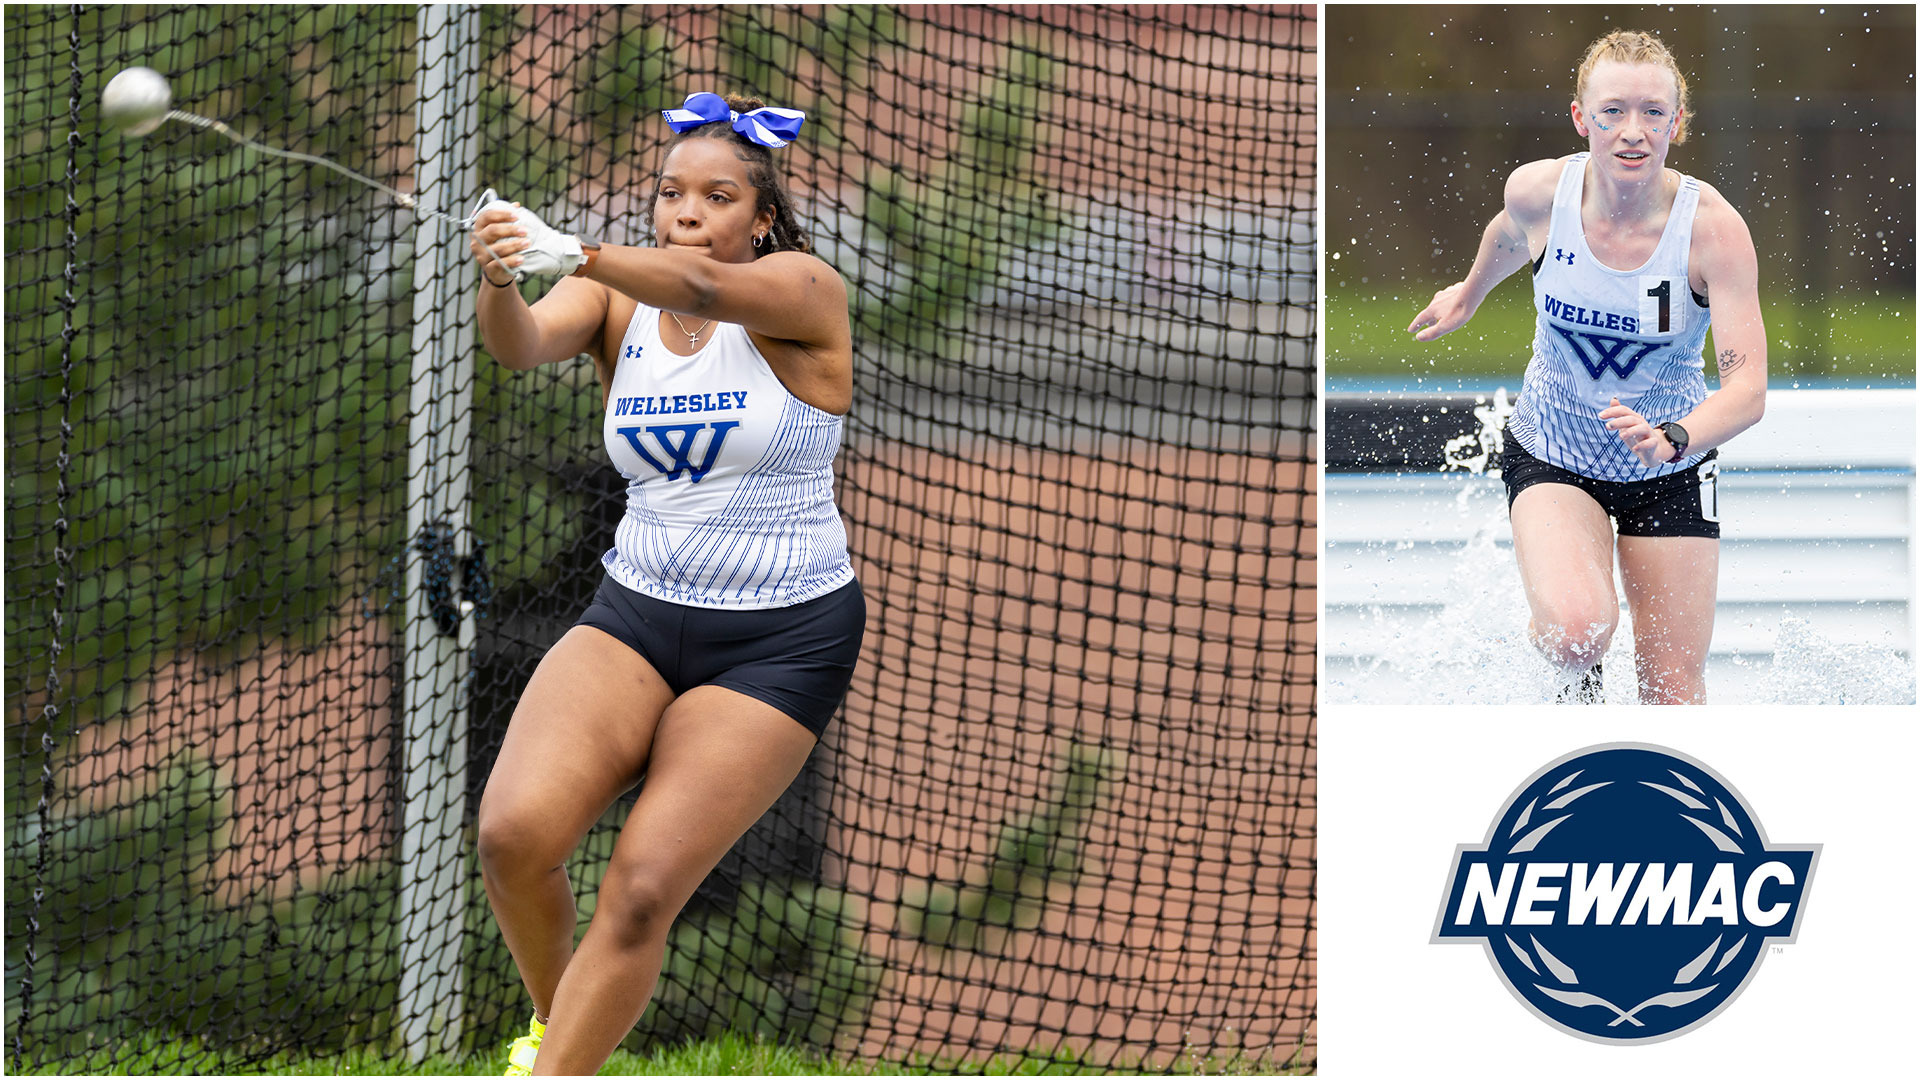 Kenya Francis '26, Simone Beauchamp '26 and Wellesley track & field race at the NEWMAC Championships April 26-27 (Frank Poulin)